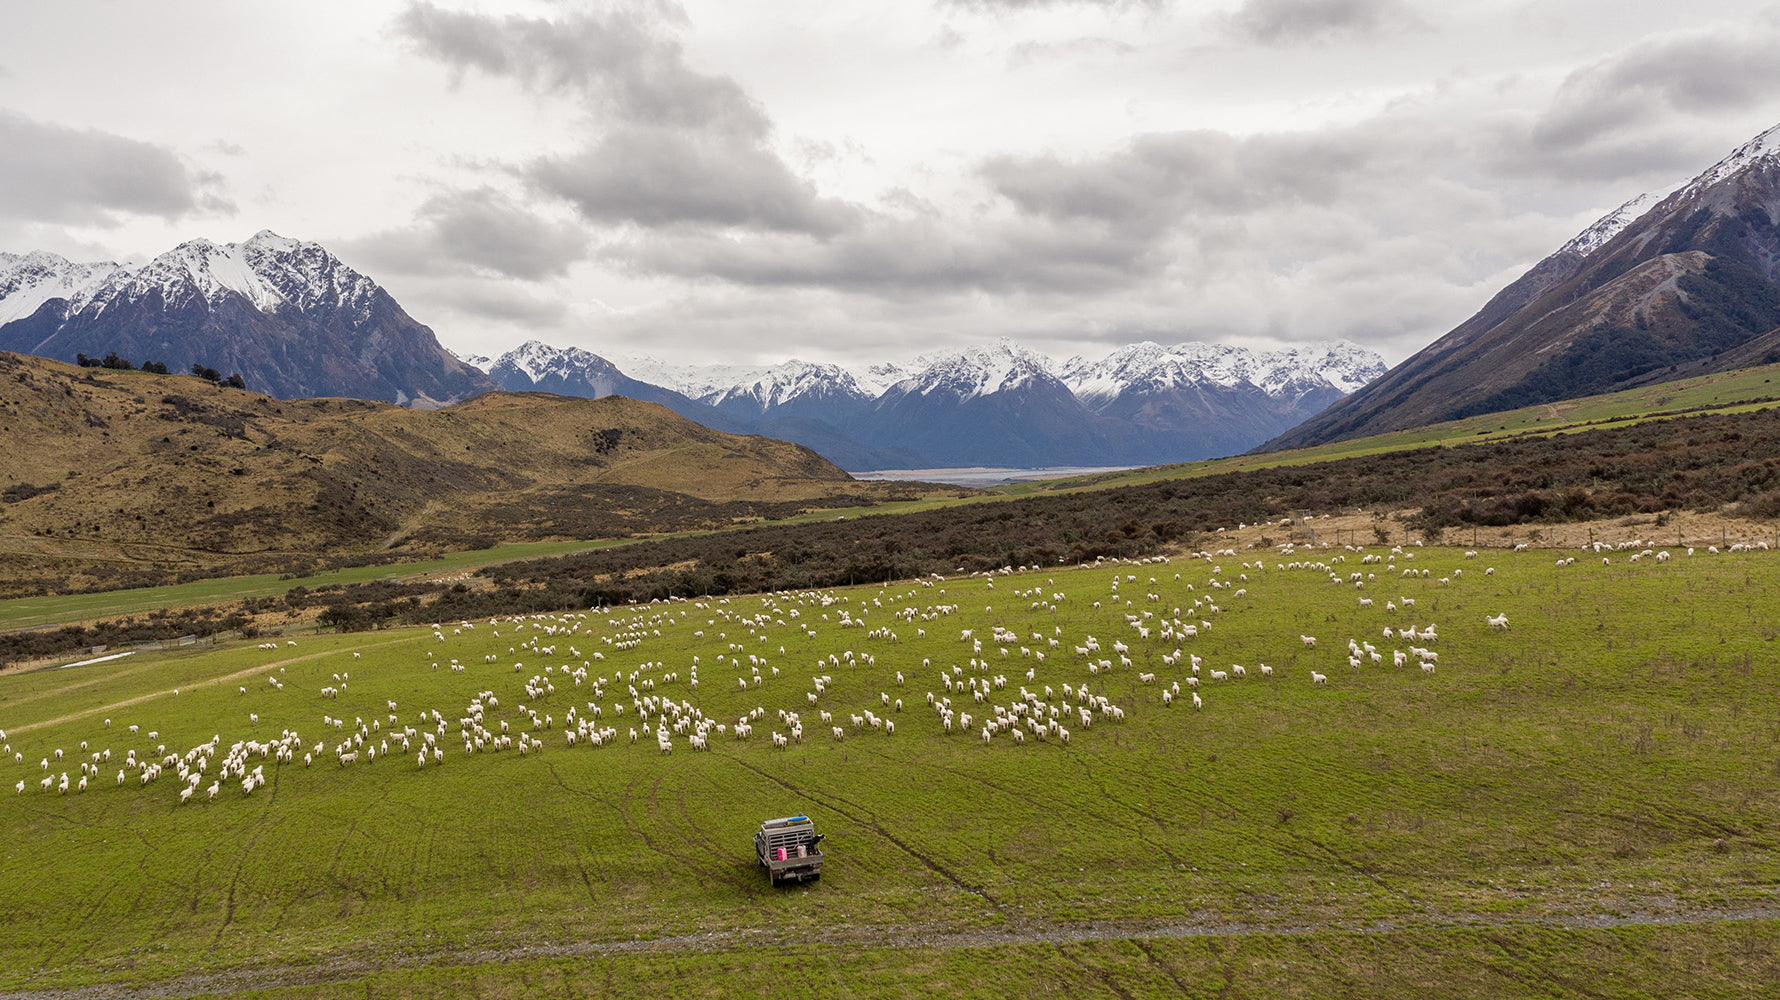 Glenthorne Station: The ecological haven where we source our merino